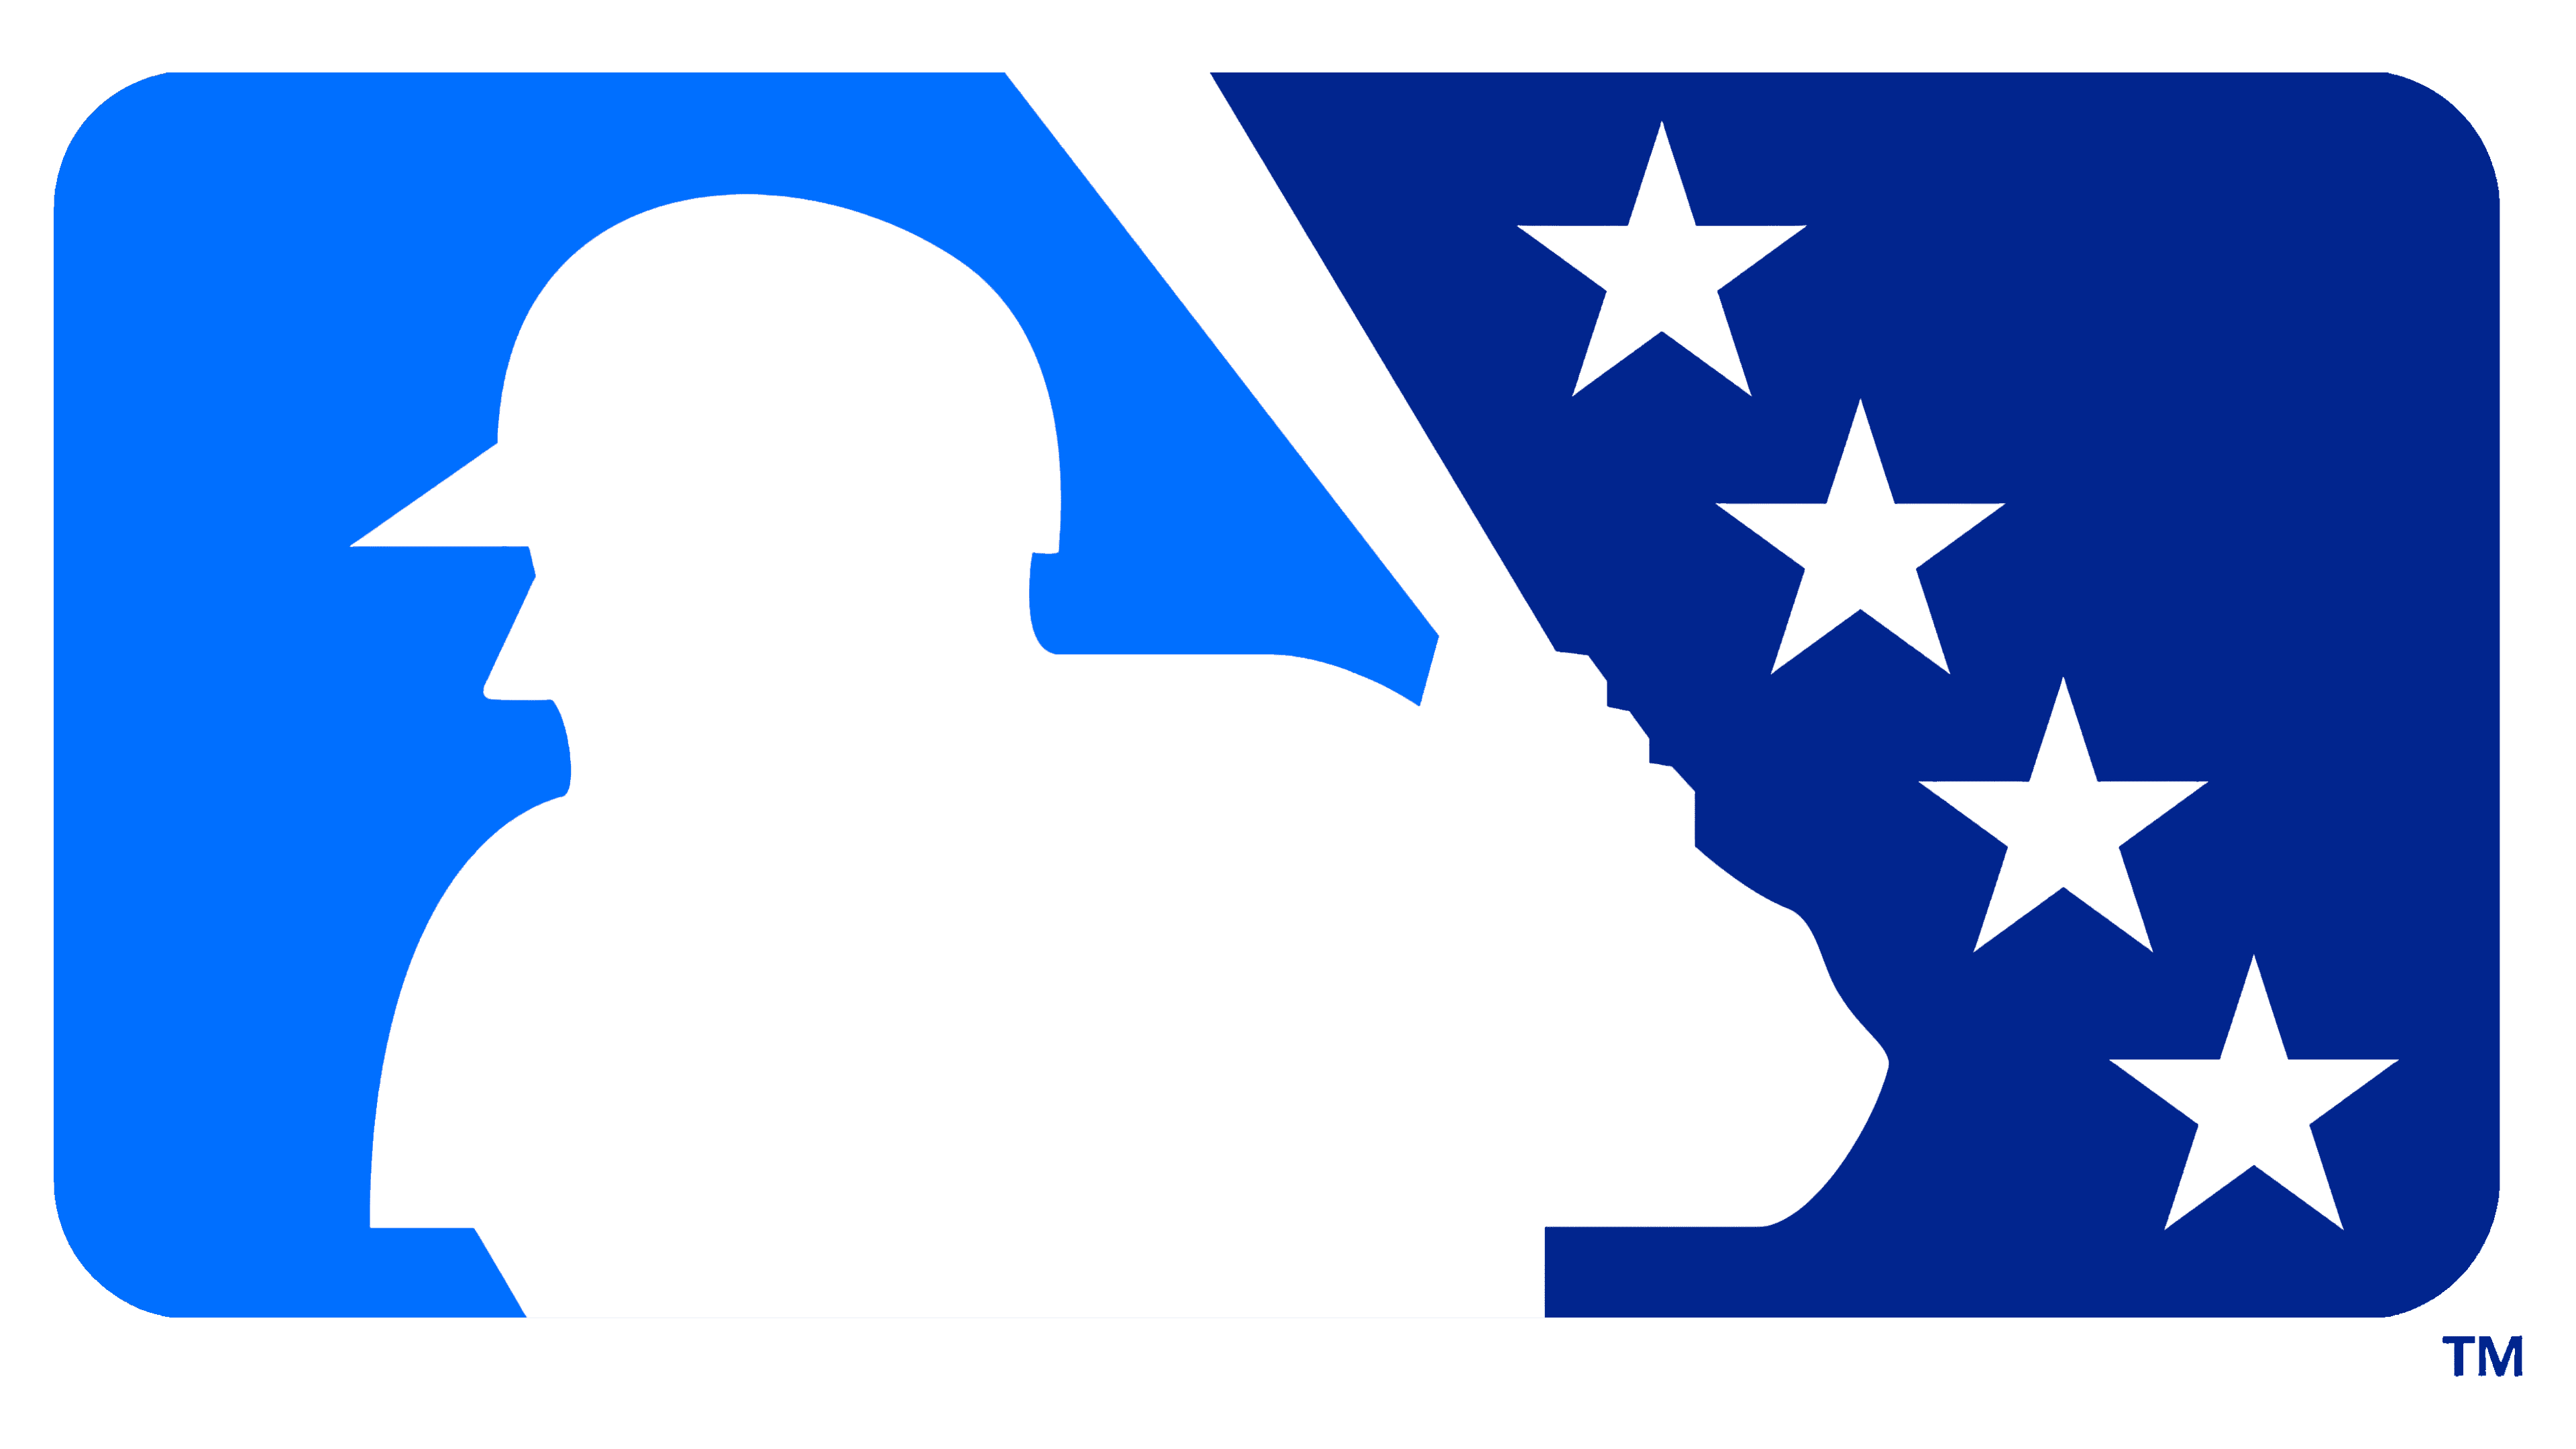 Minor League Baseball logo and symbol, meaning, history, PNG, brand